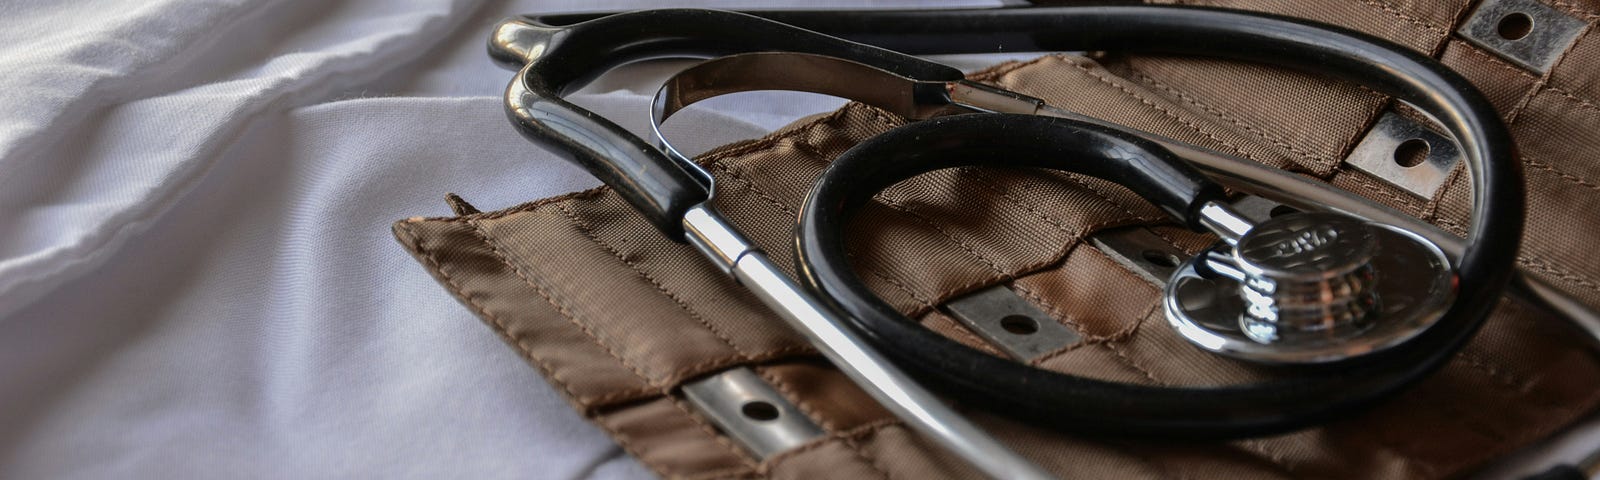 A sphygmomanometer and stethoscope lying on a white bedsheet